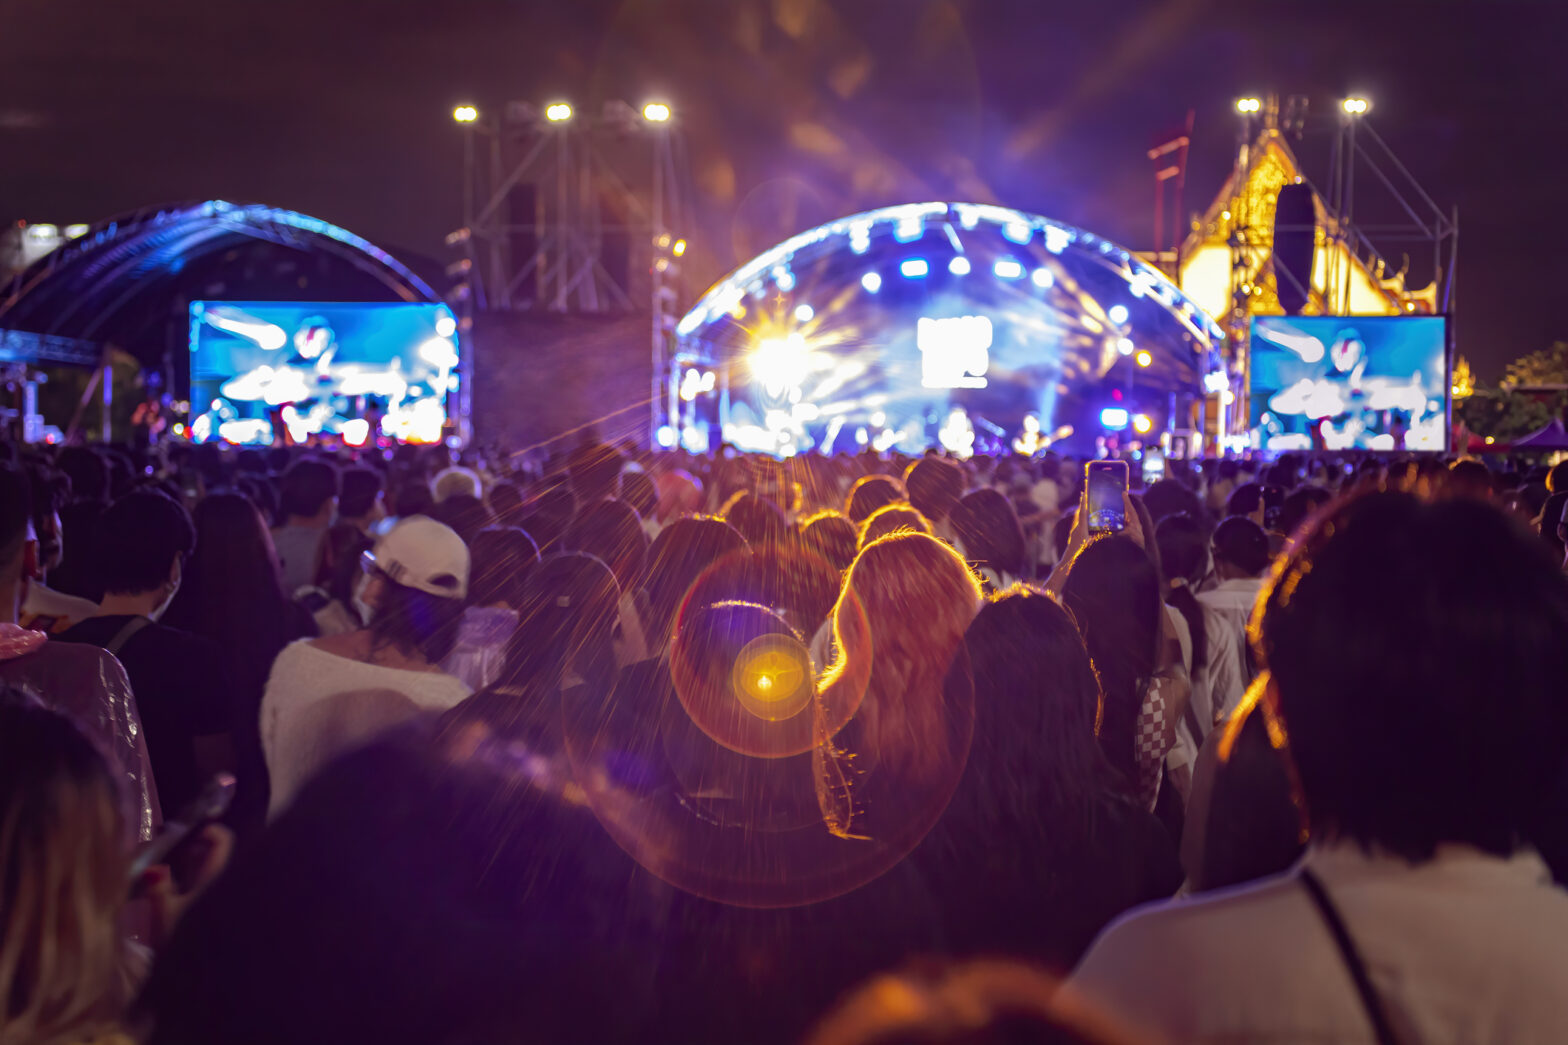 People at Music Festival with Illuminated Lights At Night Background